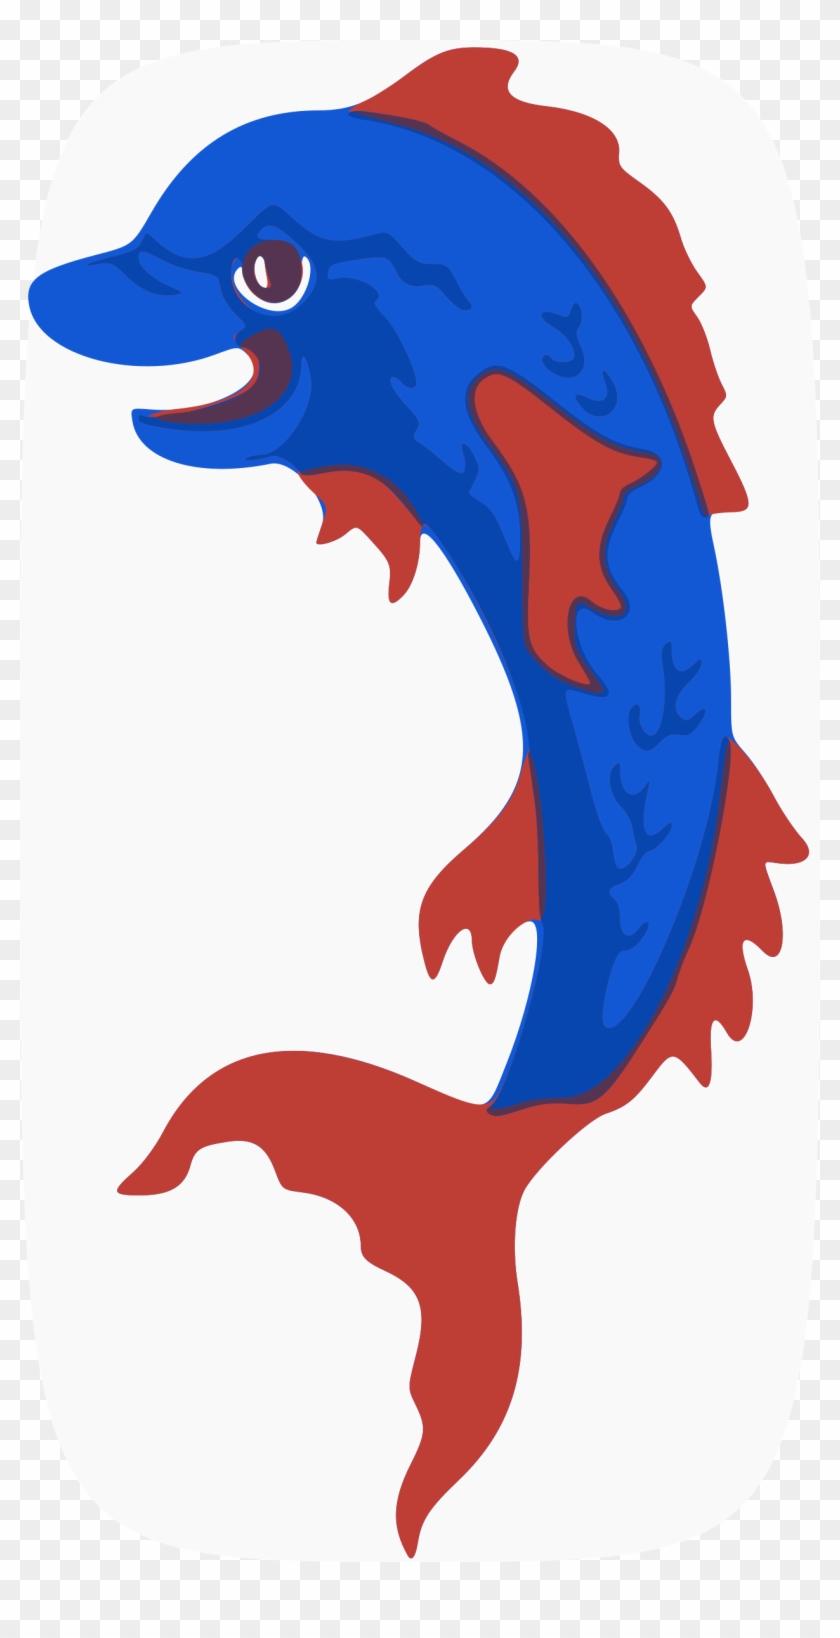 Miami Dolphins Drawing - Heraldic Fish Png #1312895